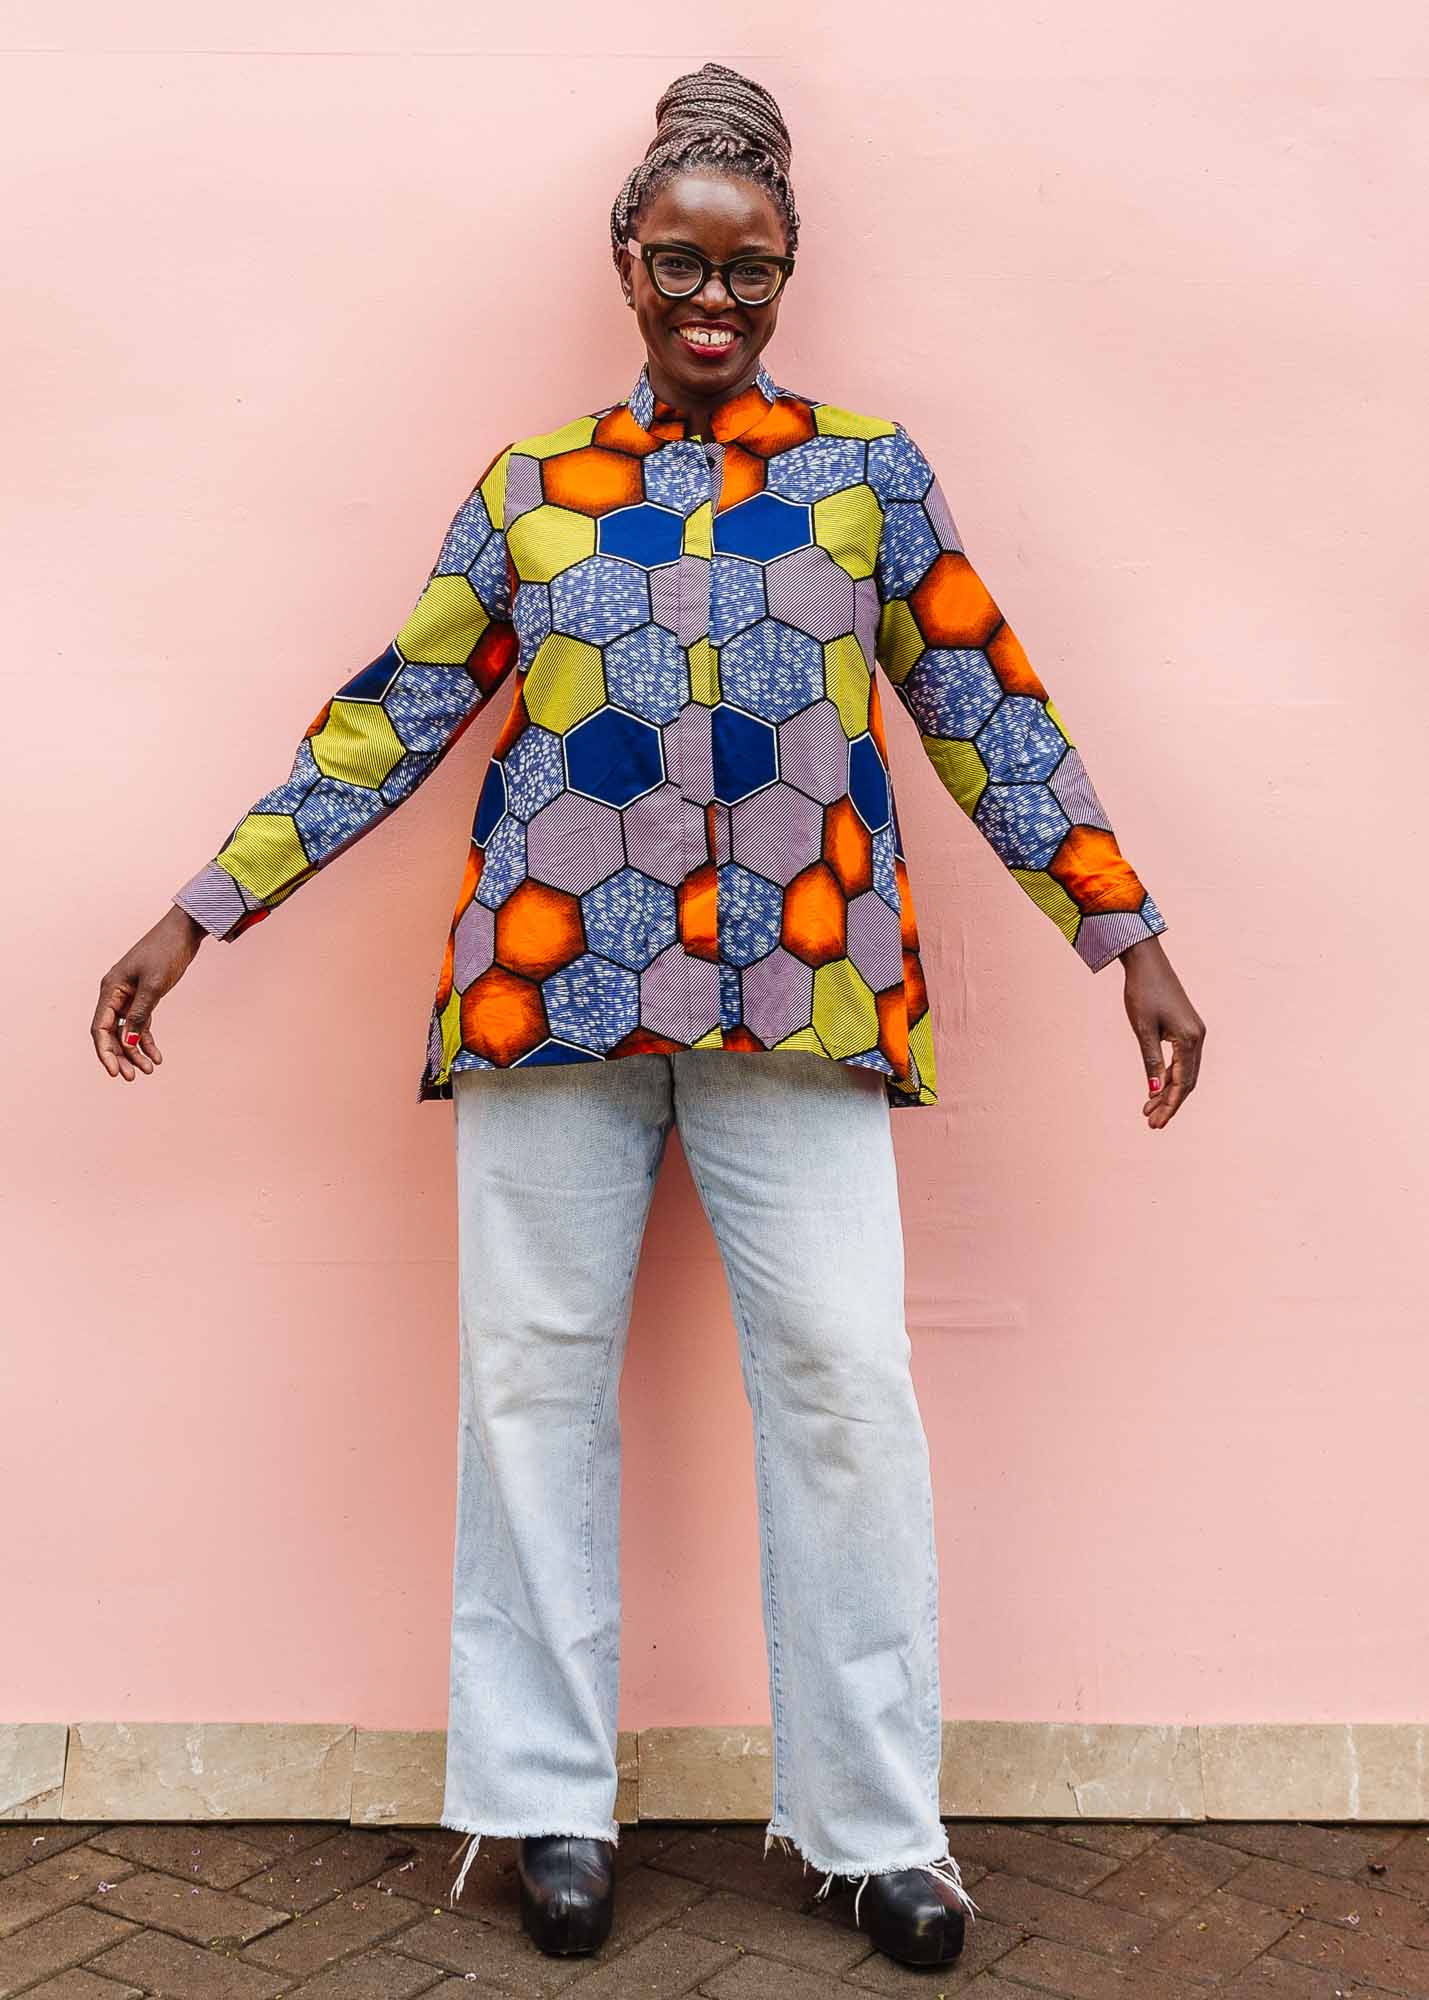 The model is wearing multicolored long sleeved shirt with geometric print 